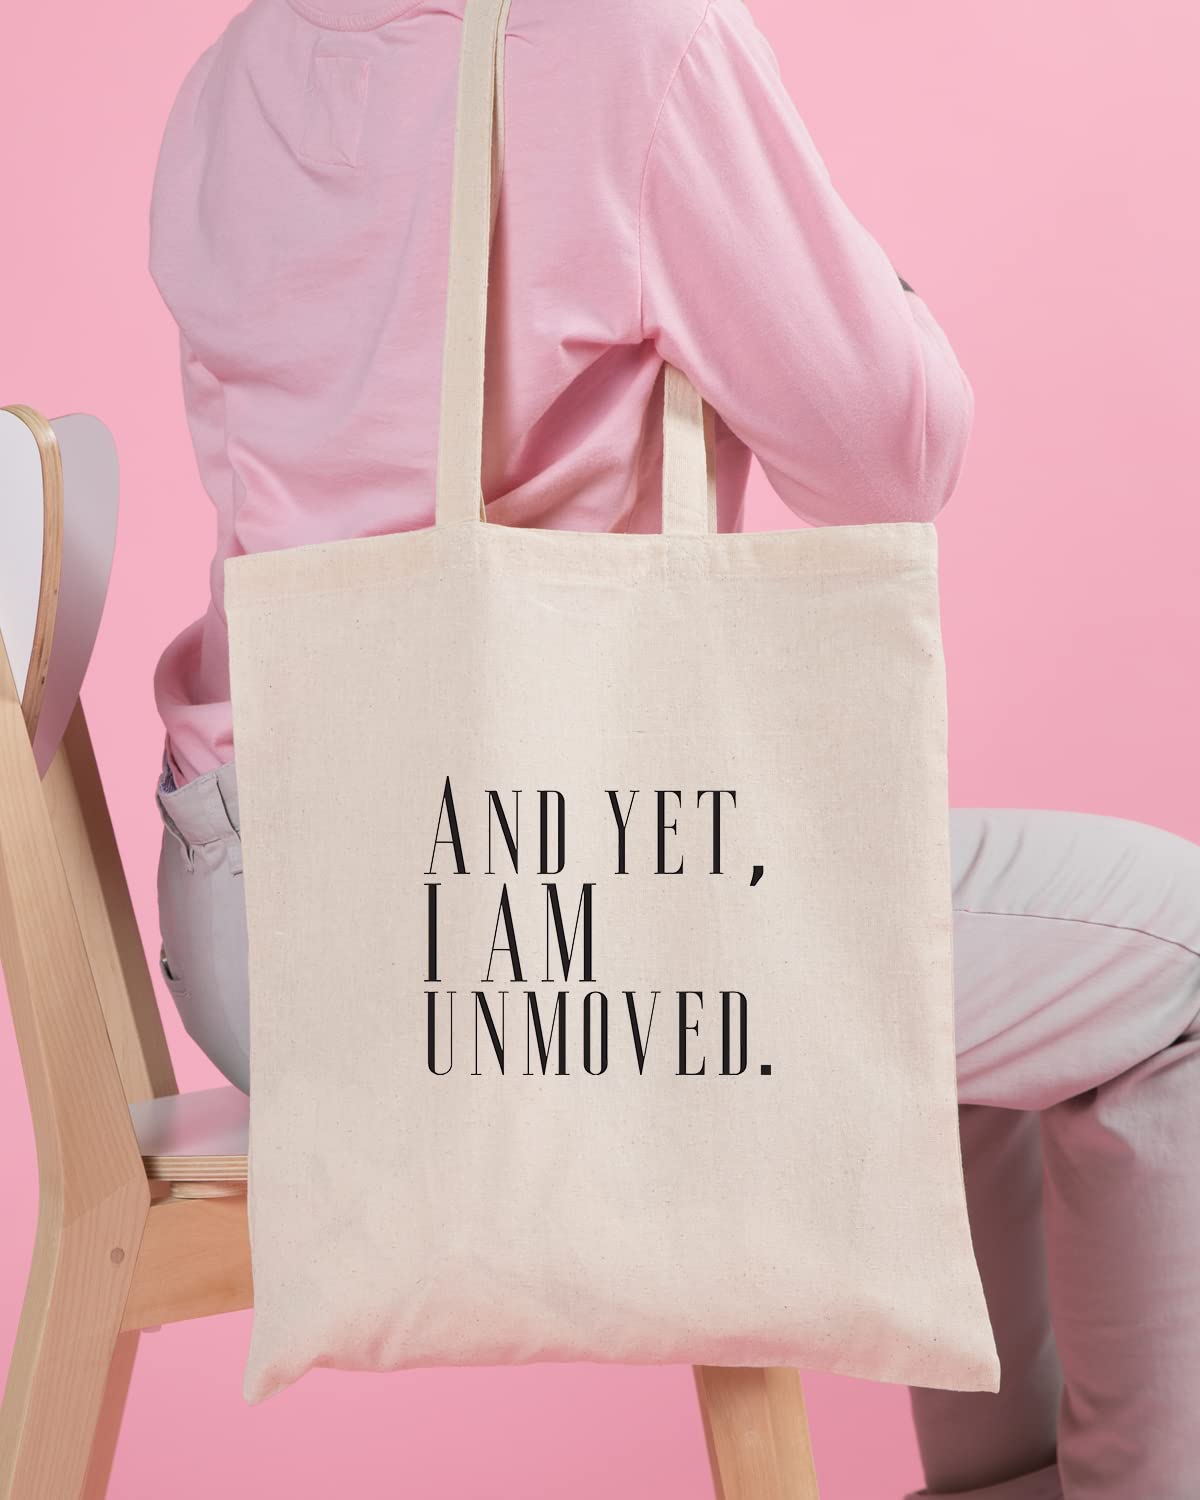 The Pink Magnet And Yet, I Am Unmoved Tote Bag - Canvas Tote Bag for Women | Printed Multipurpose Cotton Bags | Cute Hand Bag for Girls | Best for College, Travel, Grocery | Reusable Shopping Bag | Eco-Friendly Tote Bag